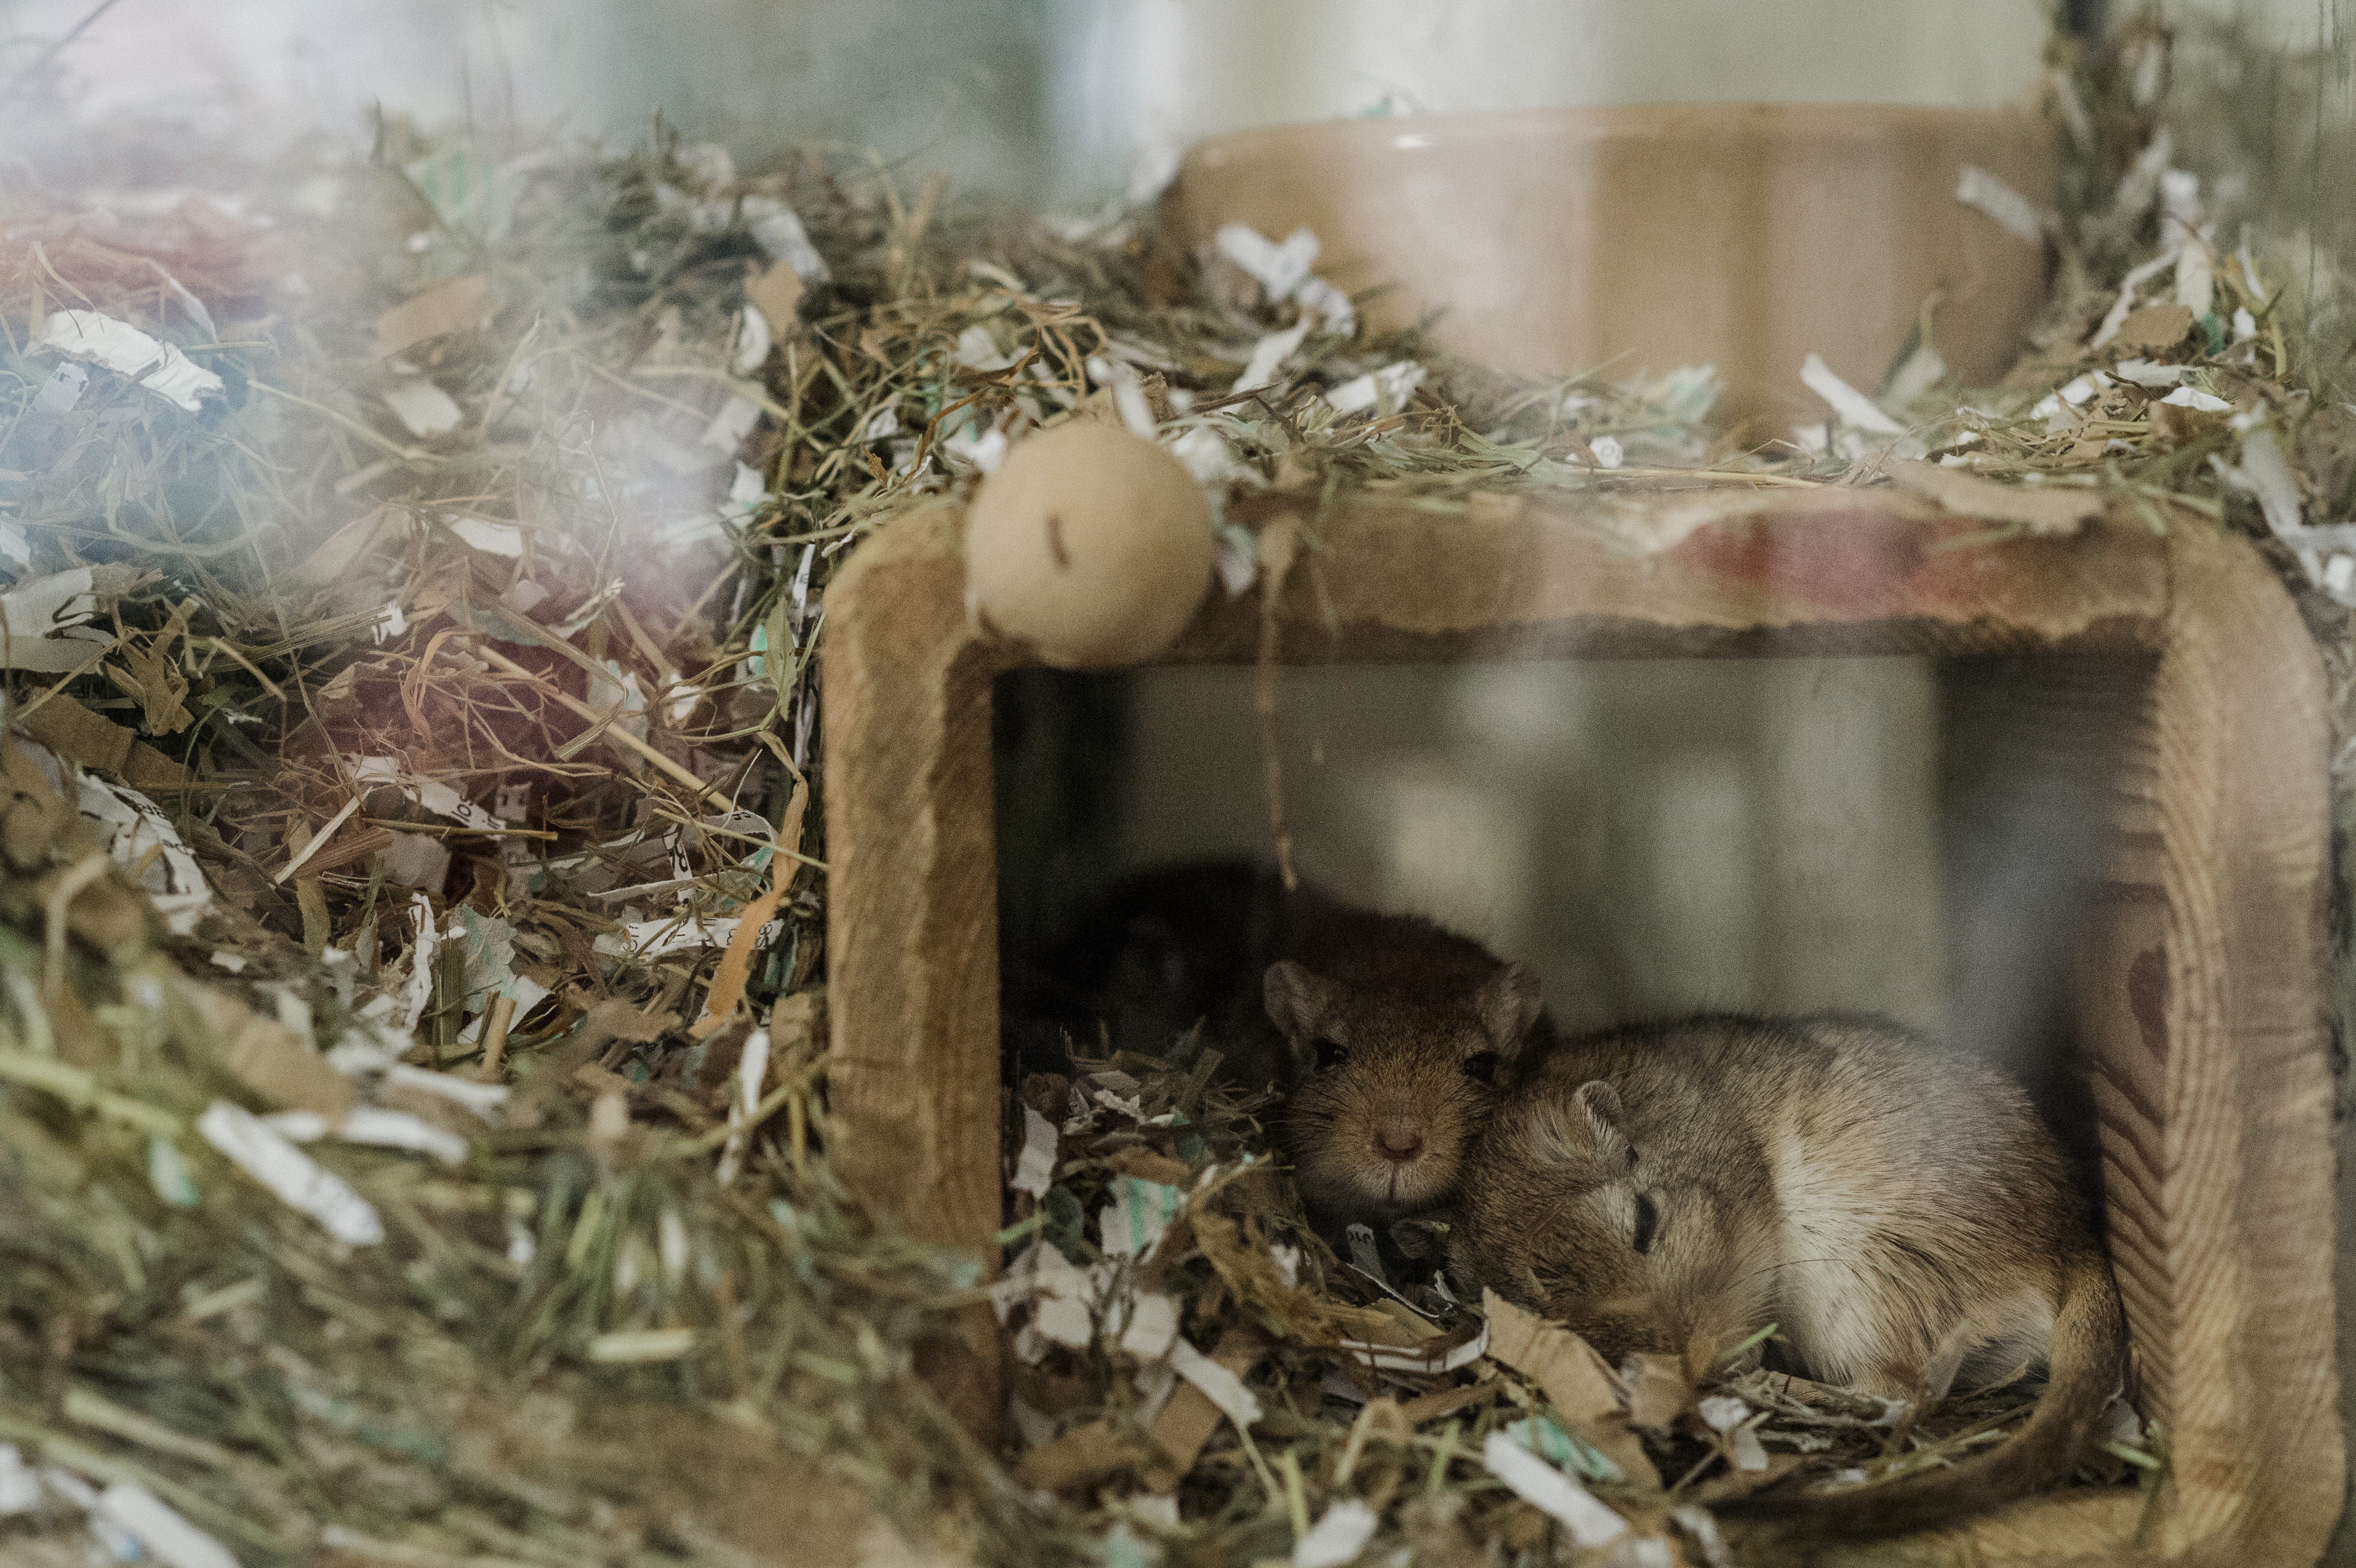 A pair of gerbils sleep in a hideaway in their accommodation, surrounded by bedding.